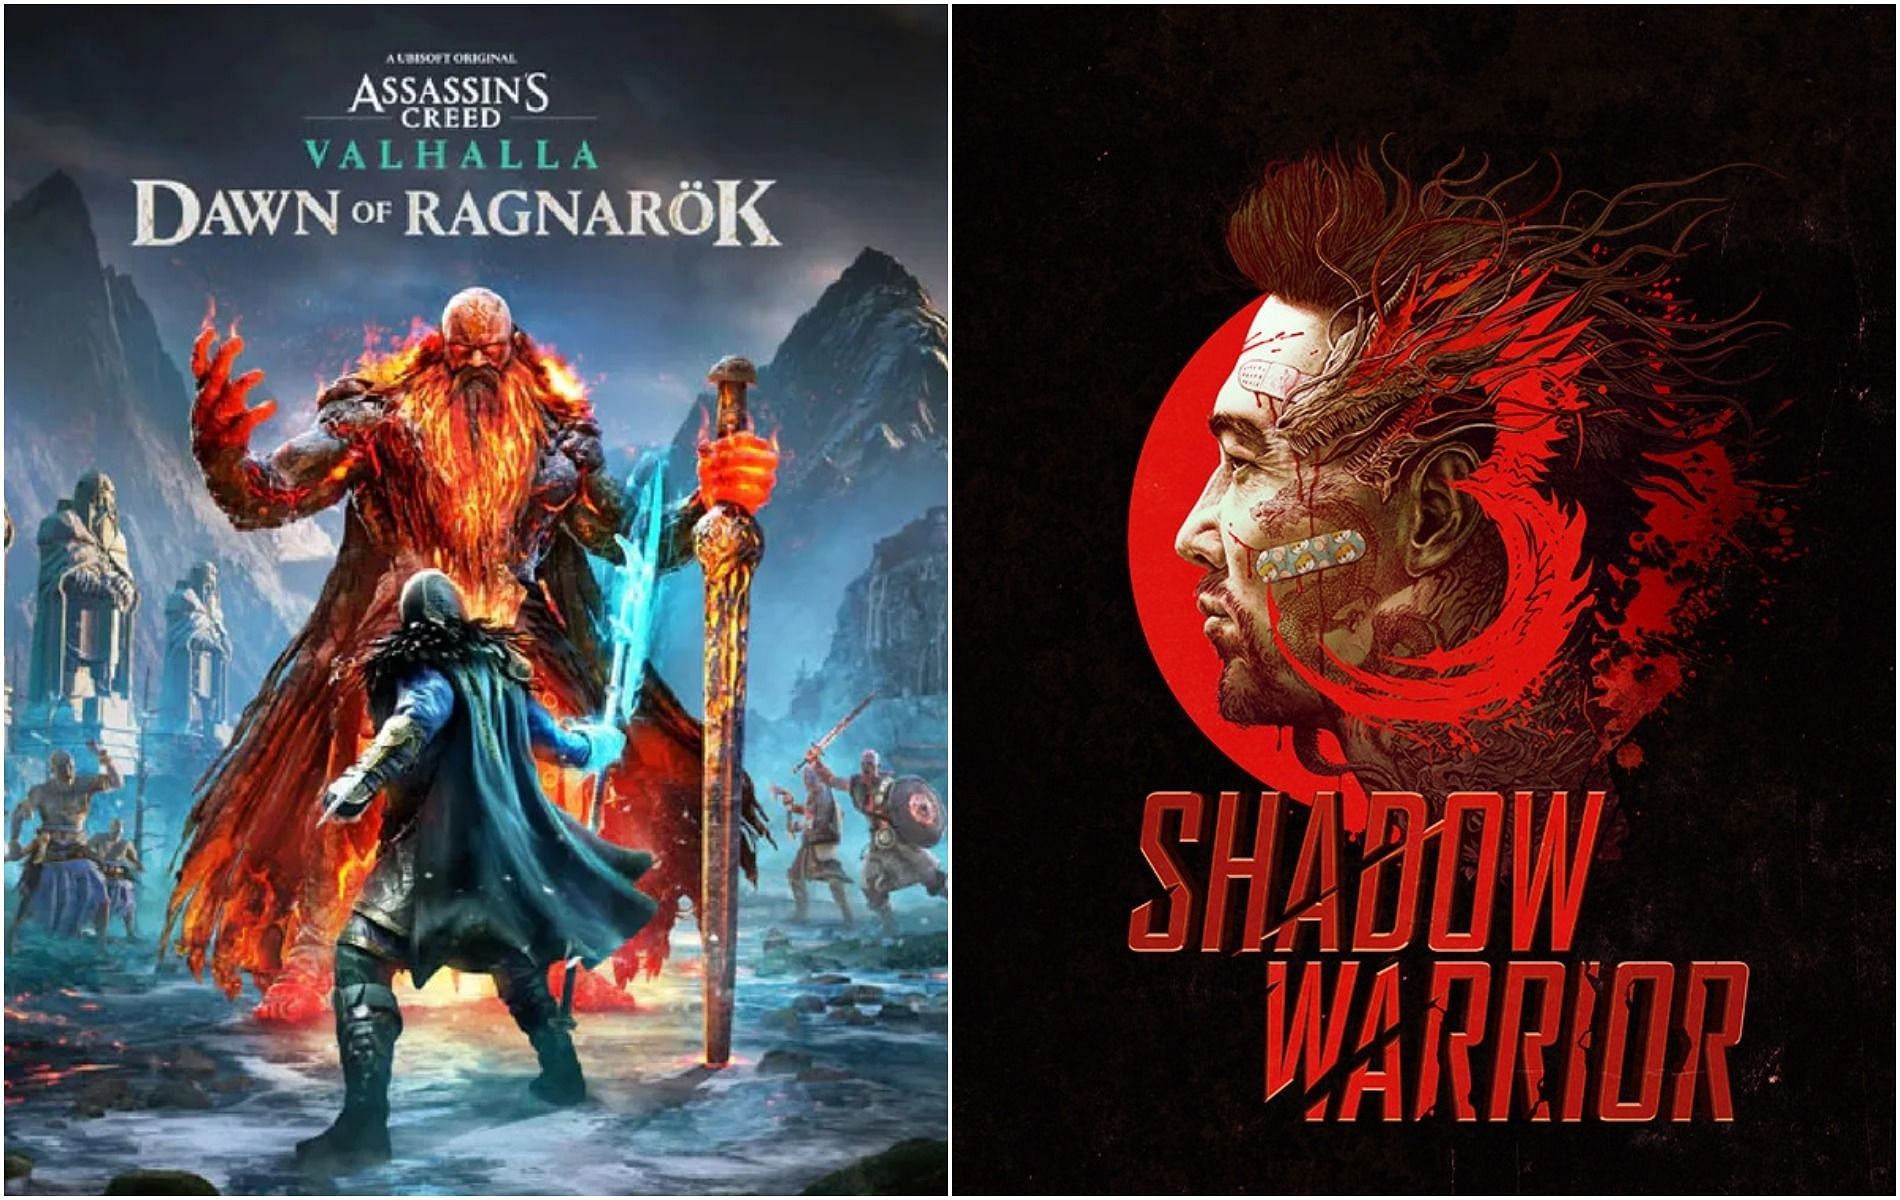 Assassin&#039;s Creed Dawn of Ragnar&ouml;k and Shadow Warrior 3 are some of the PC games coming in March 2022 (Image by Ubisoft and Devolver Digital)